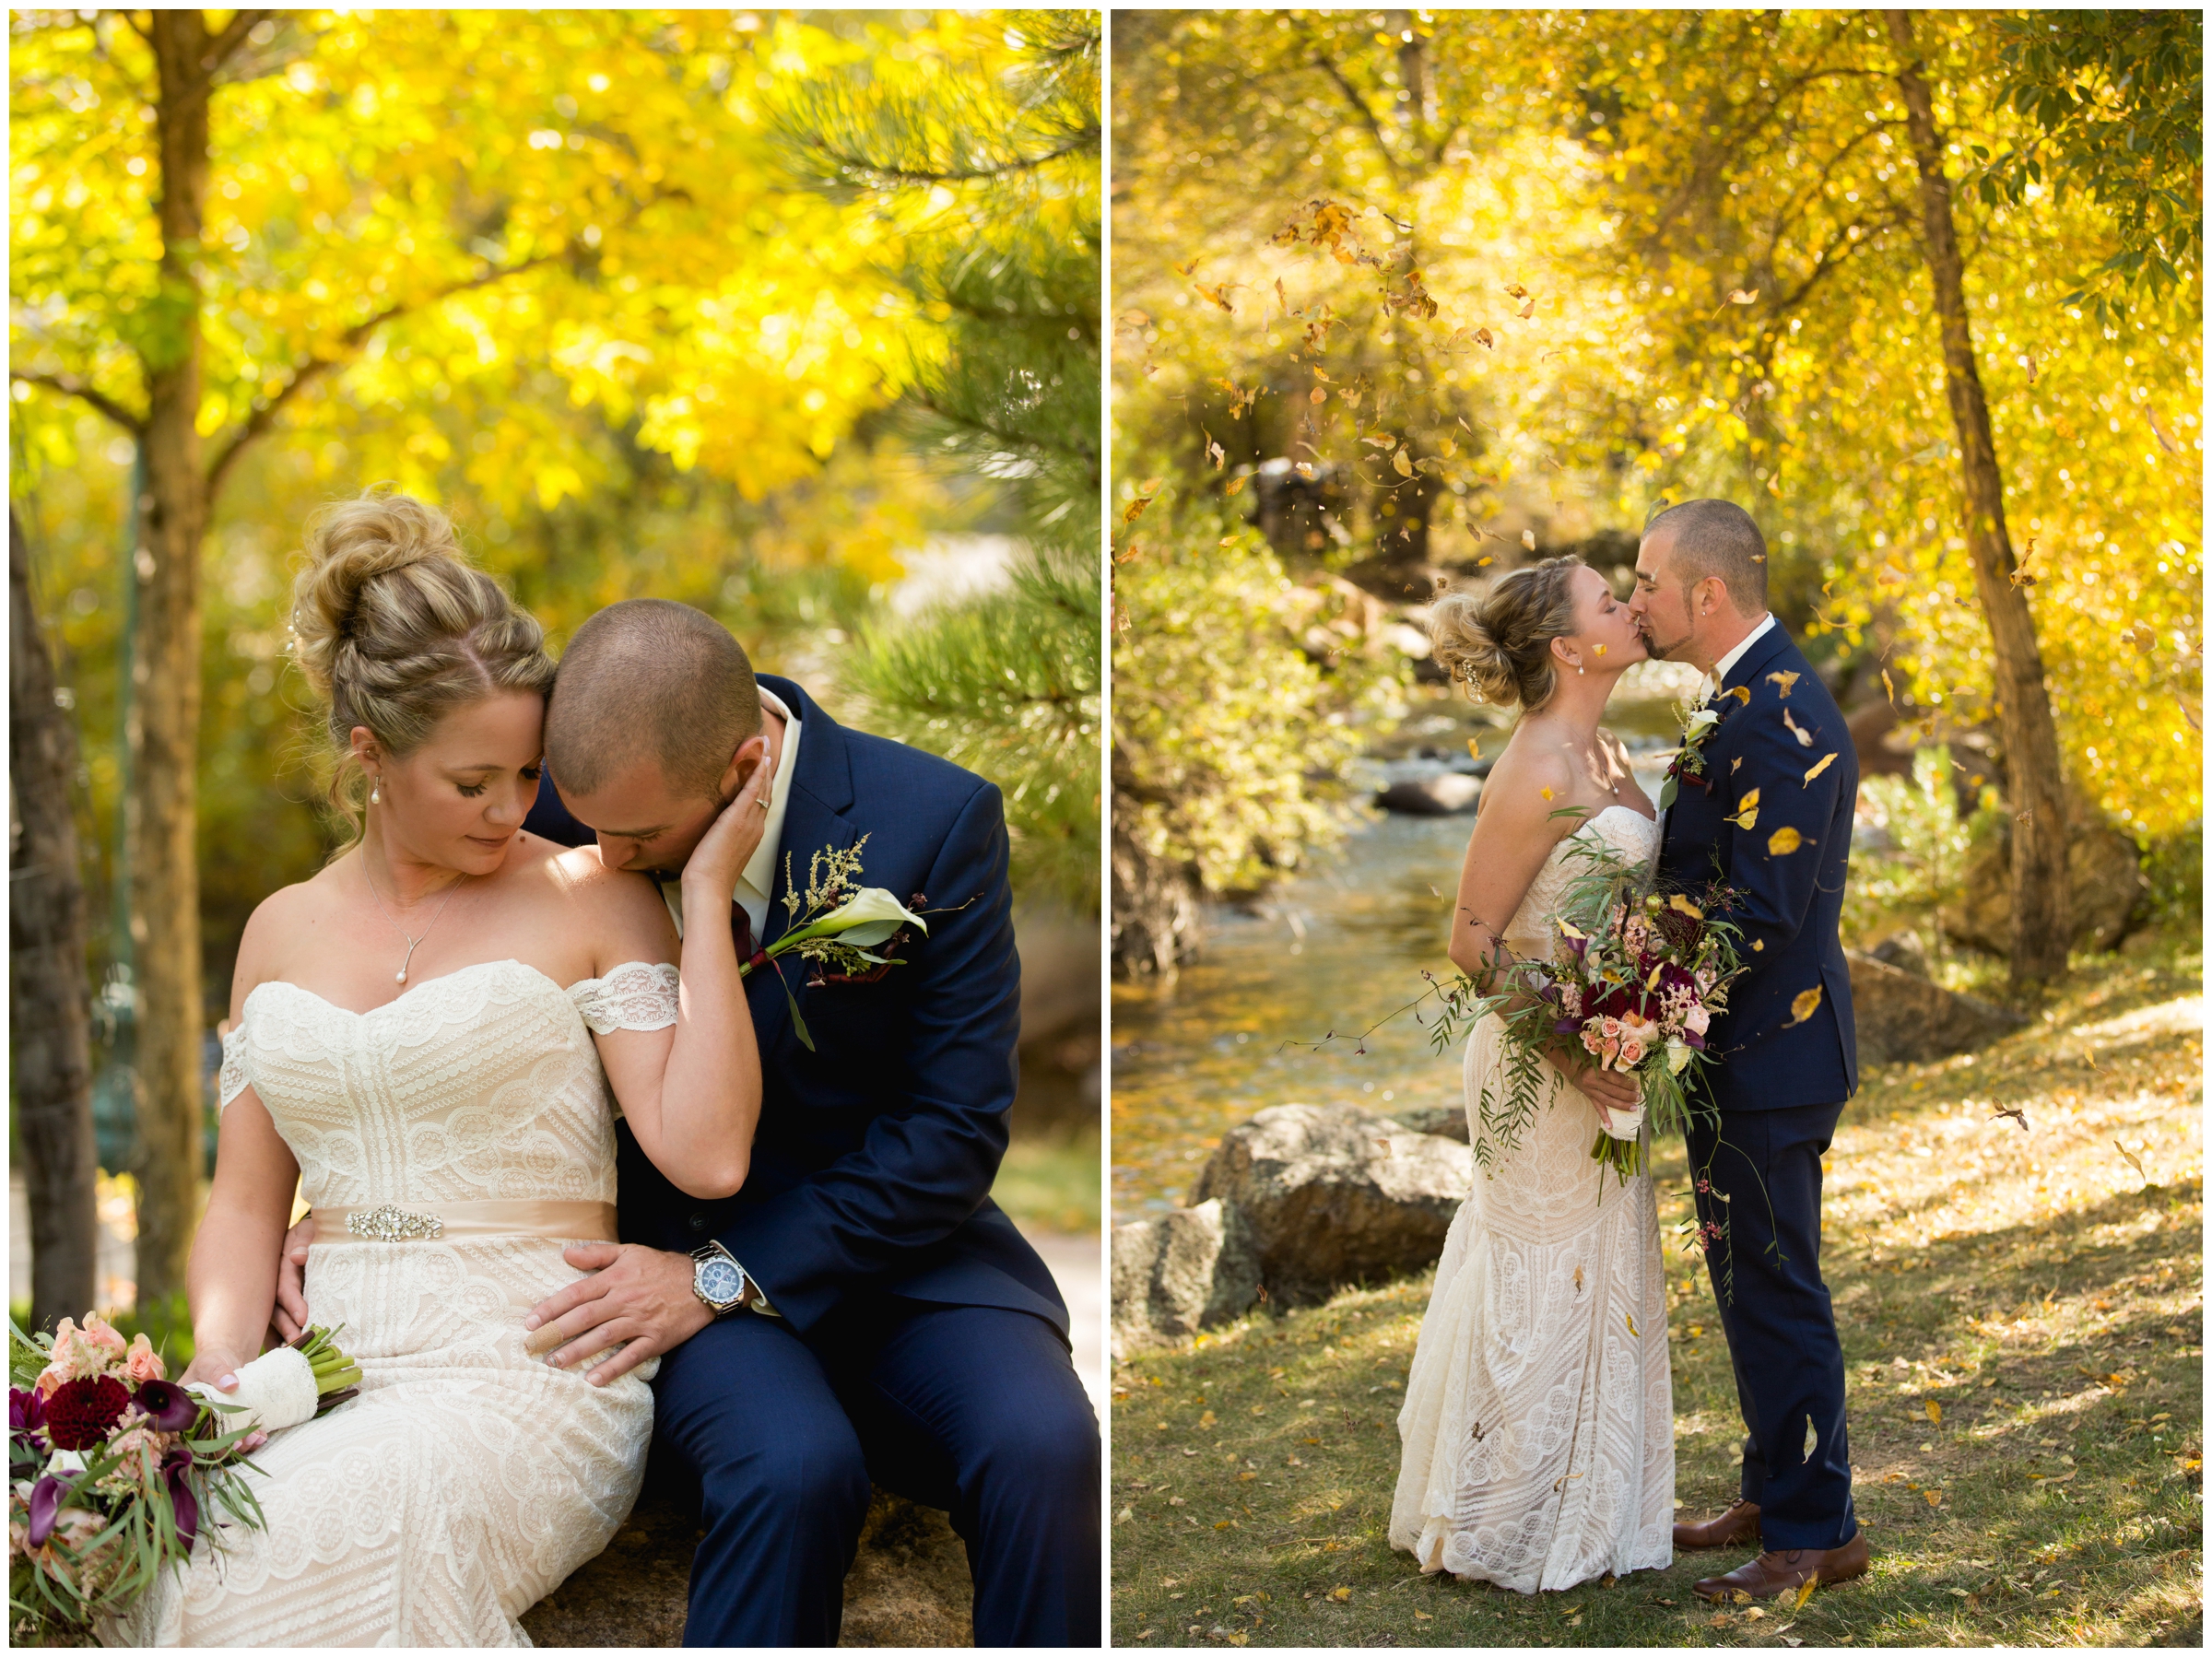 couple kissing with colorful fall foliage in background during Estes Park Colorado wedding photos 